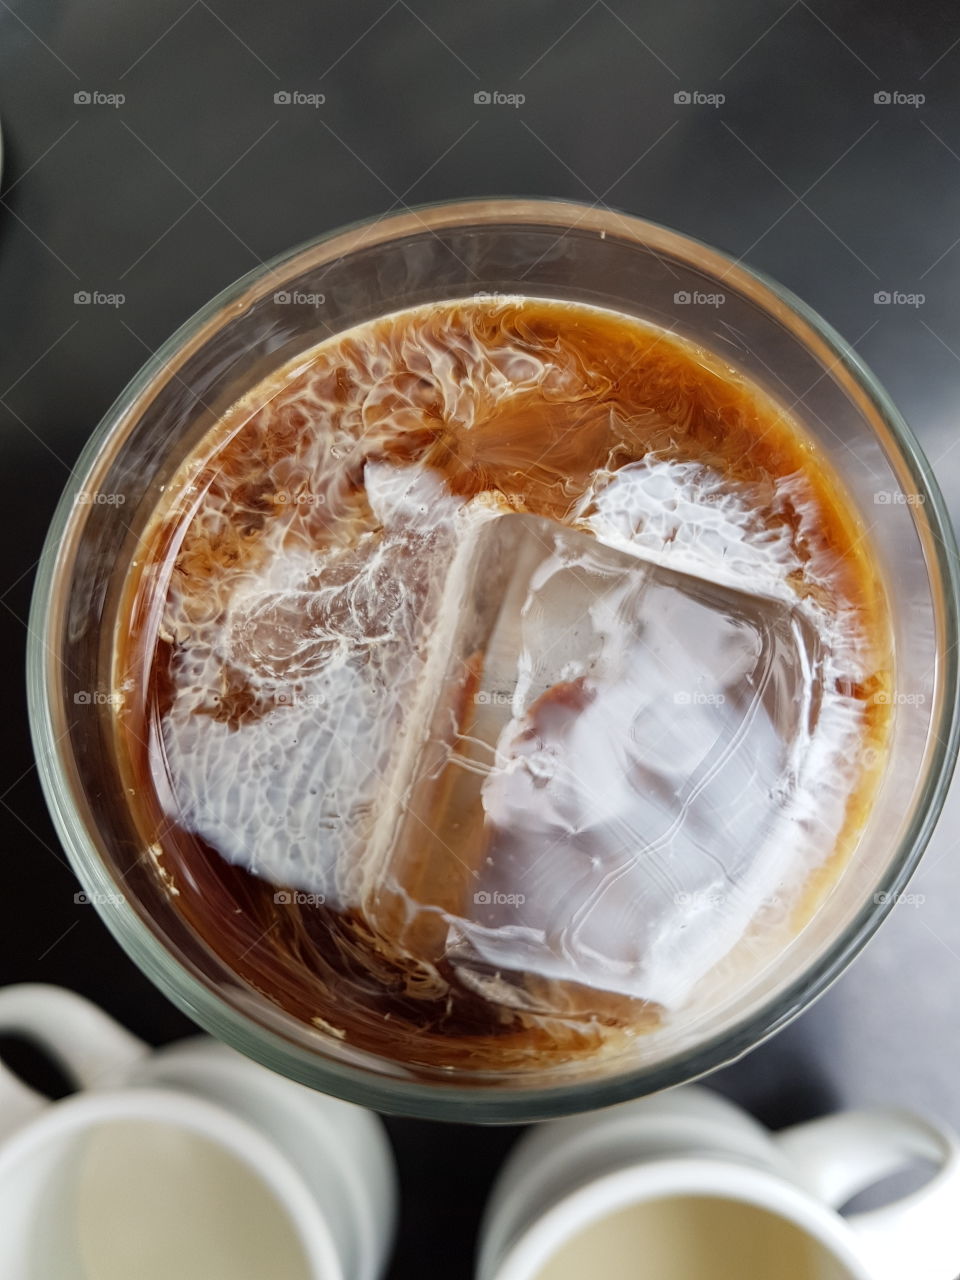 watching my morning coffee get milked over ice